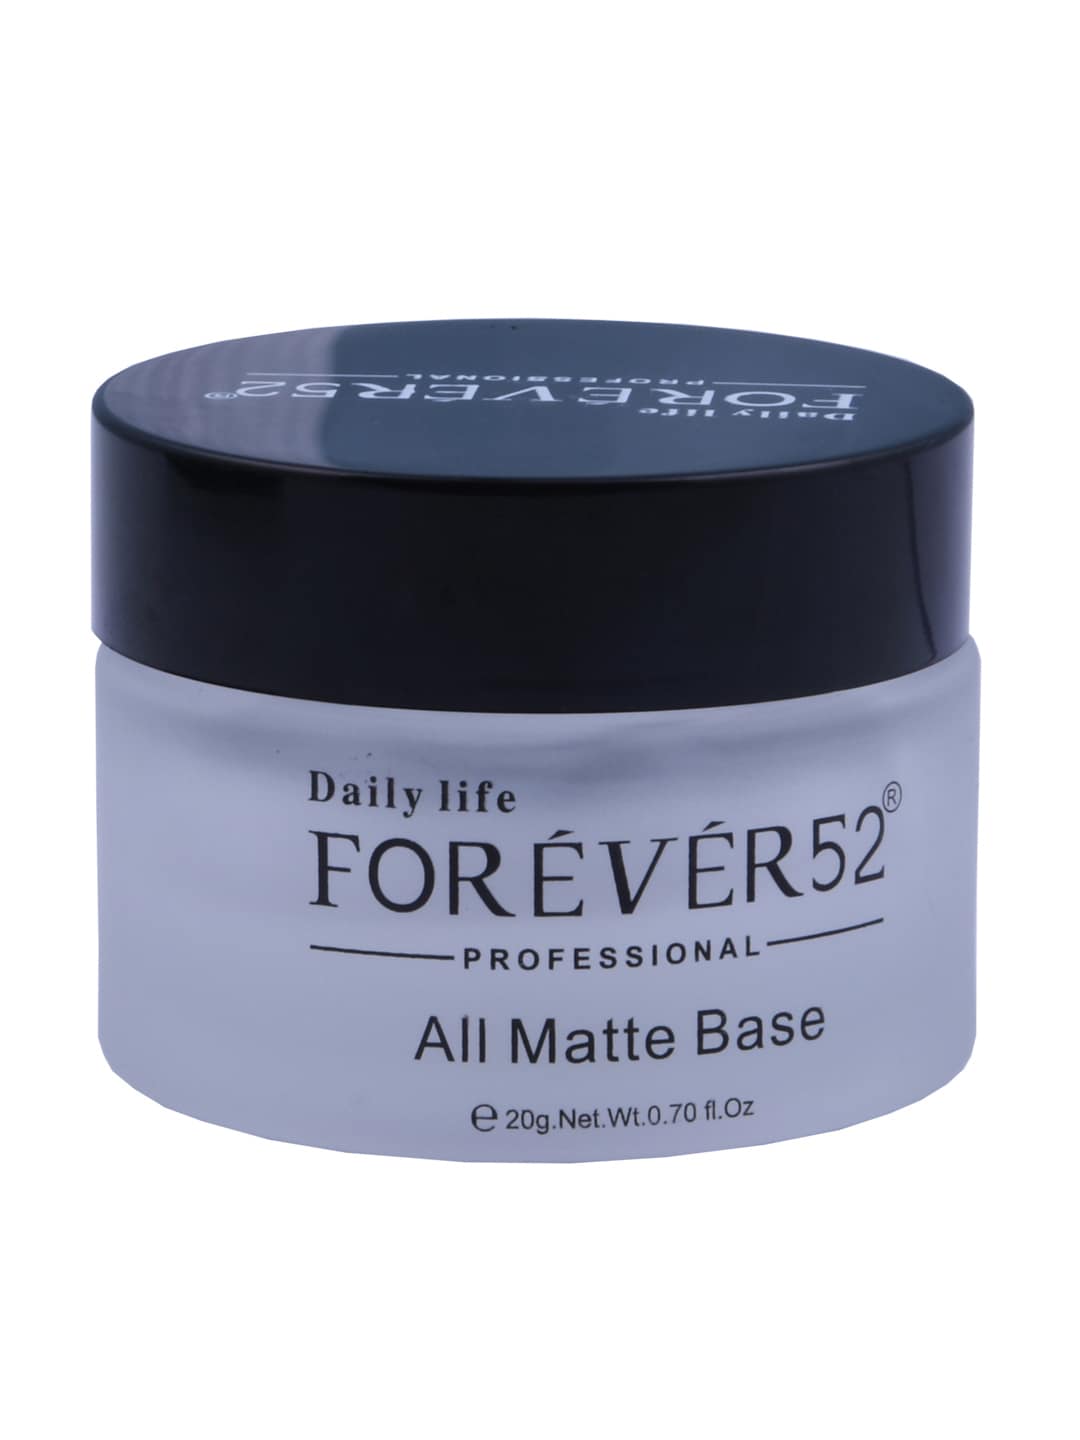 Daily Life Forever52 Women All Matte Base Primer 20 g Price in India